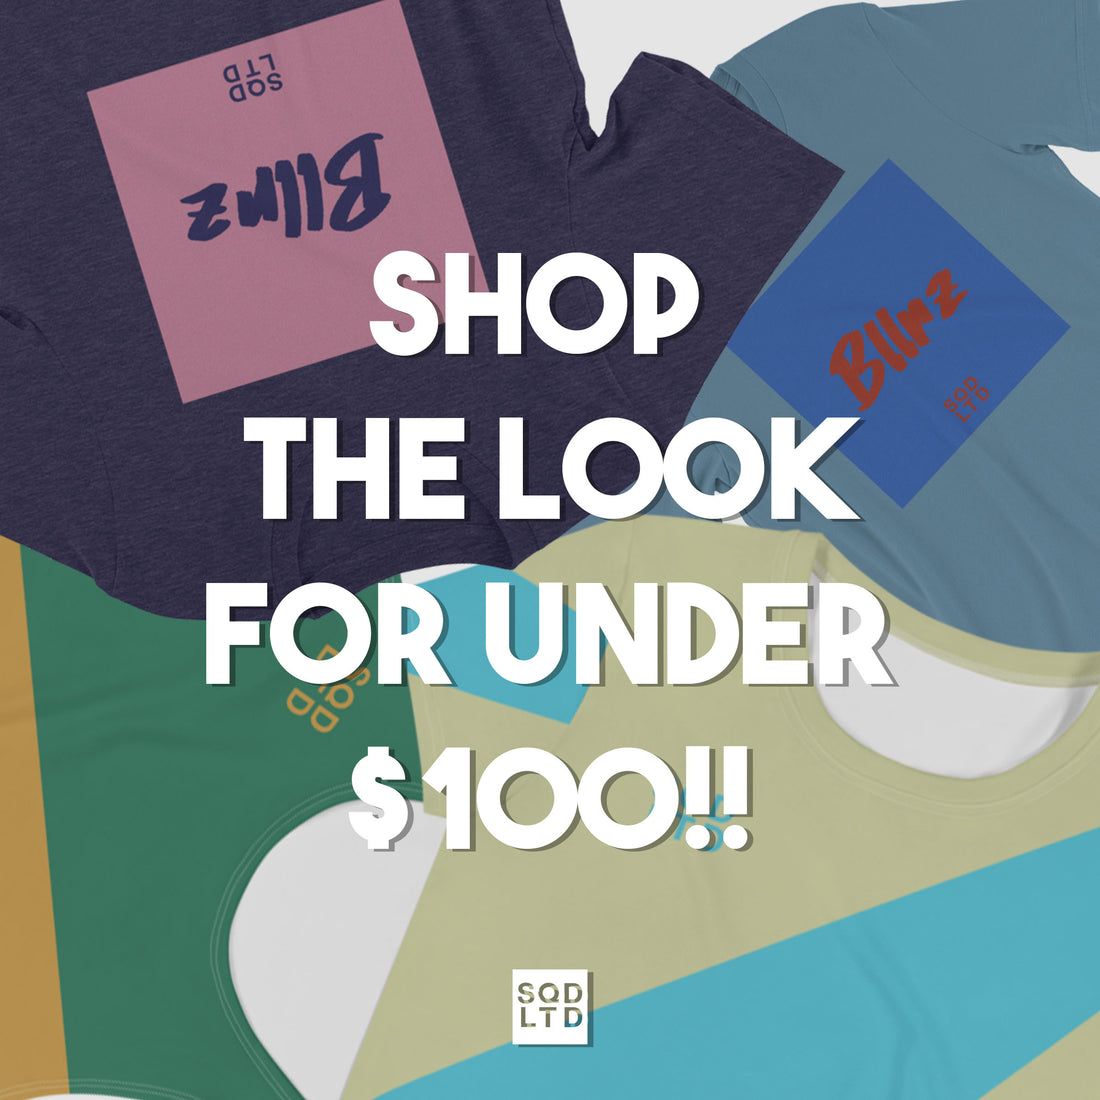 Shop The Look For Under $100 by Squared Limited